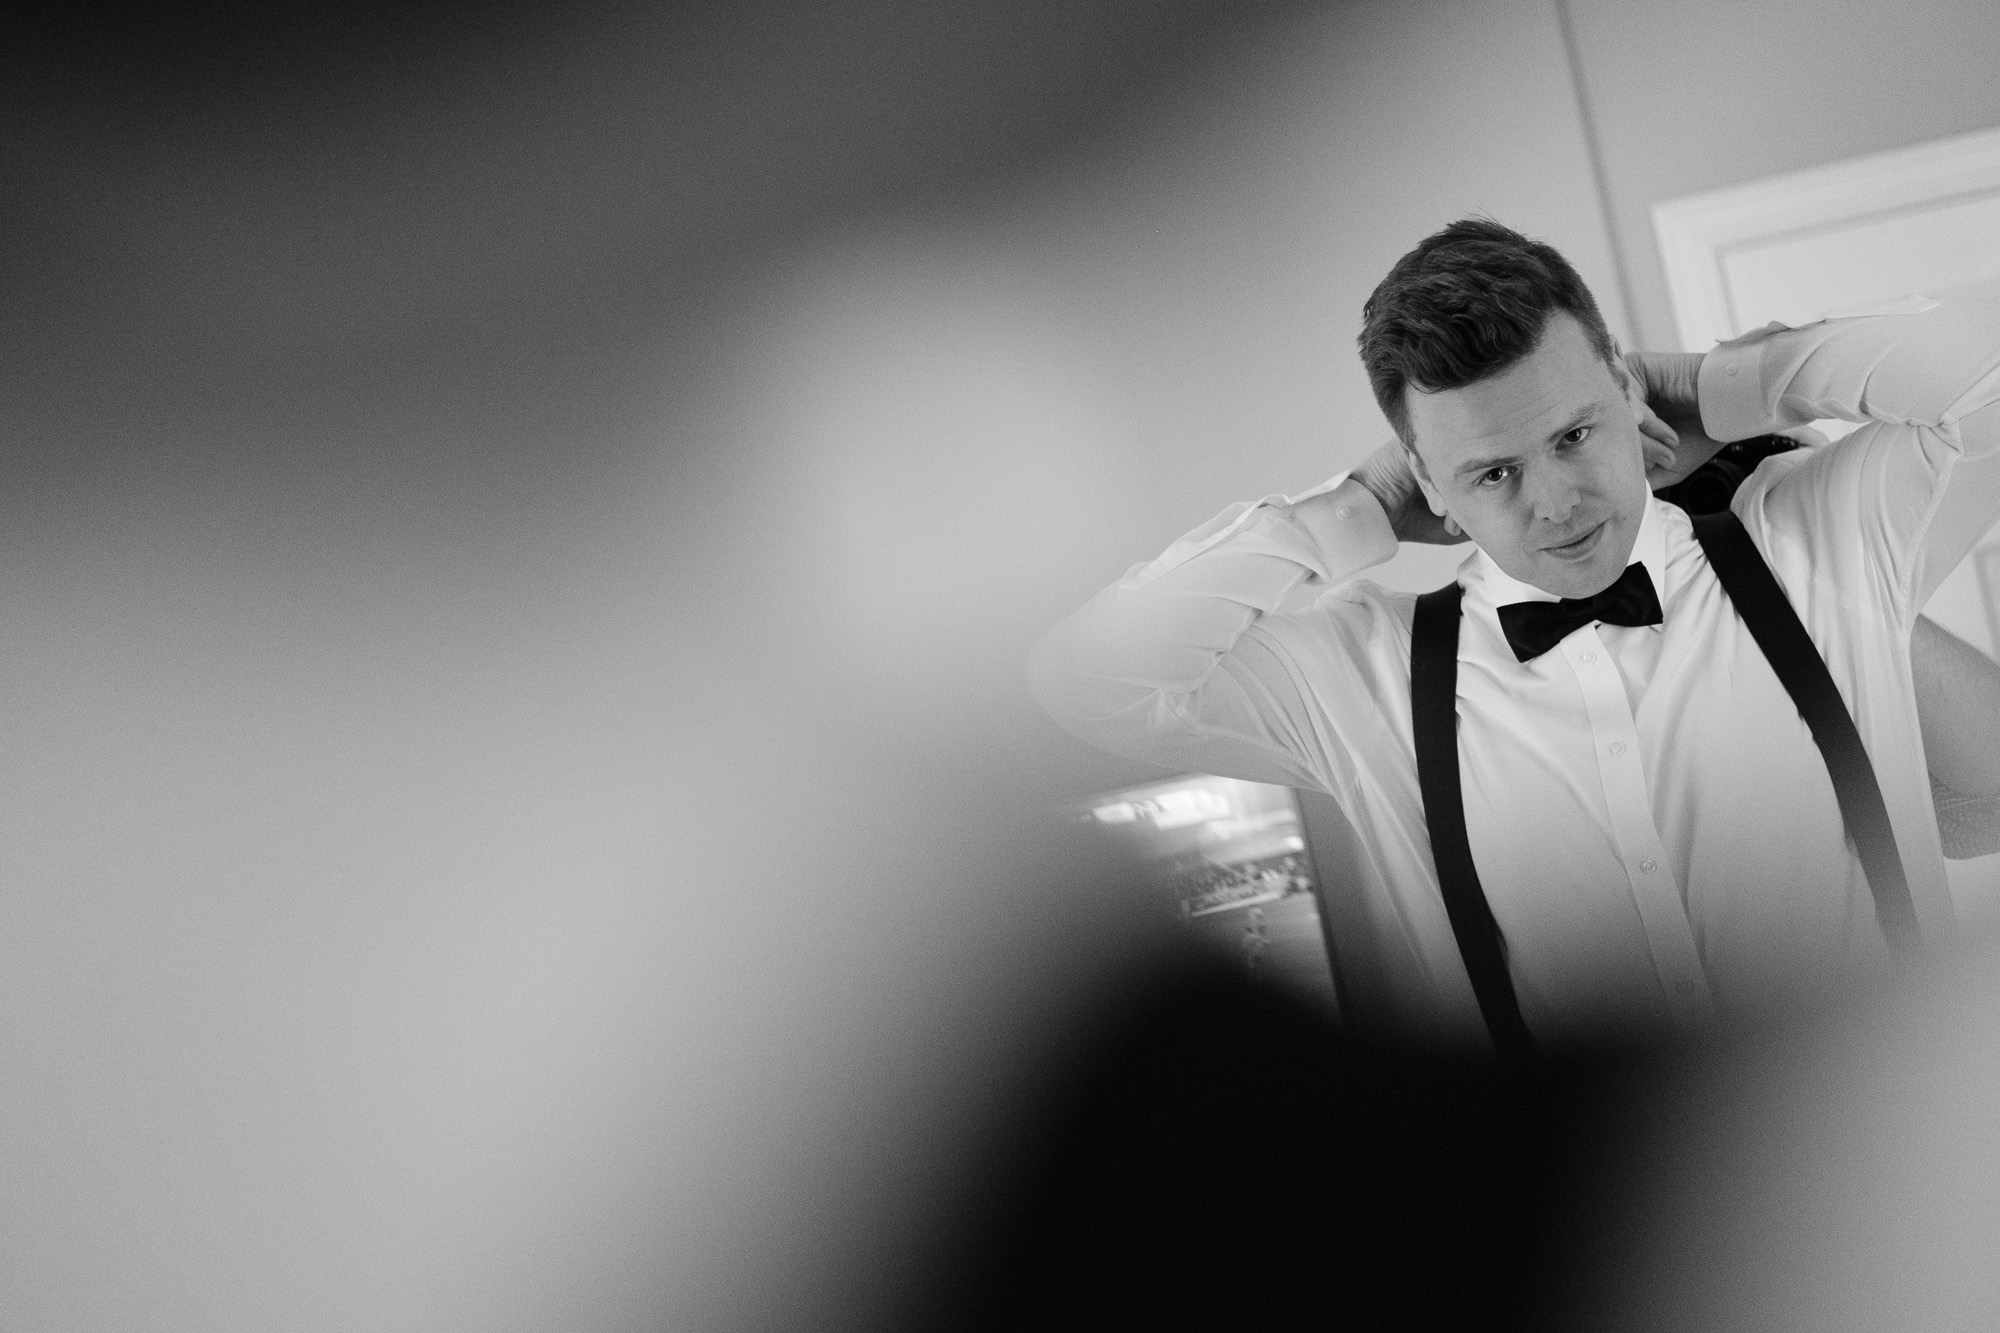  The groom adjusts his bowtie while getting ready for his wedding at the King Edward Hotel in Toronto. 